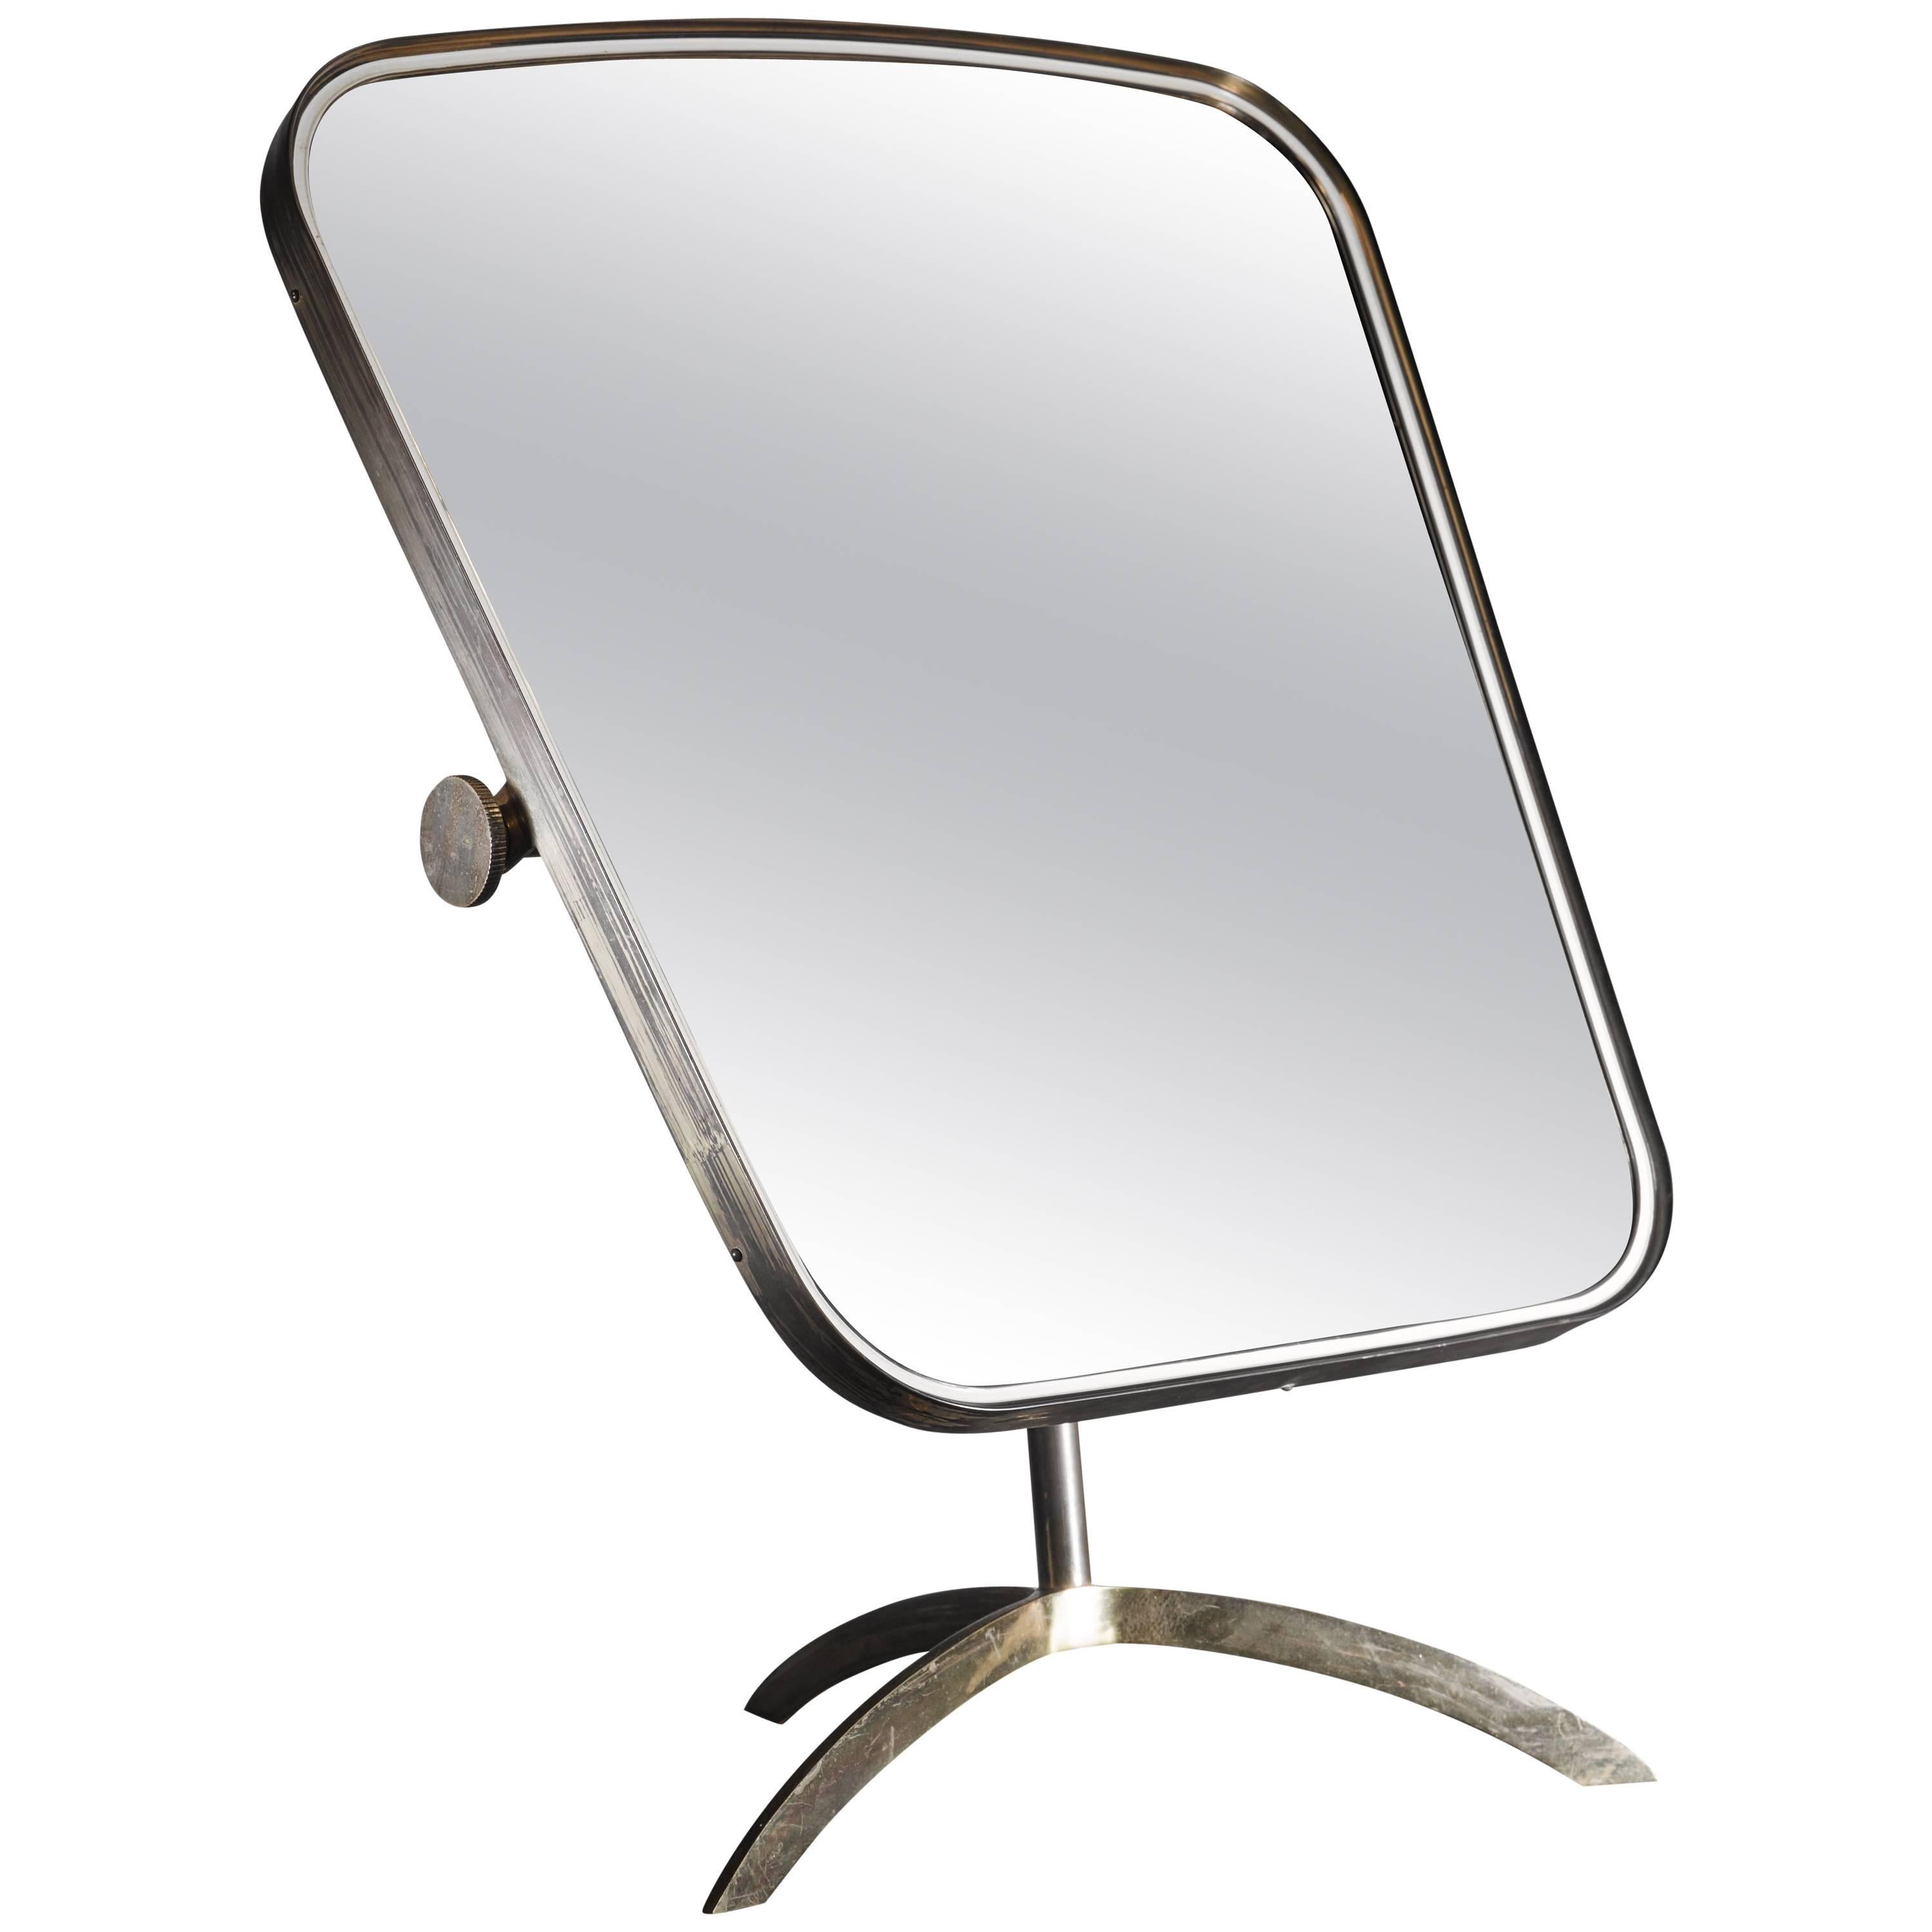 Brass Tilting Console Mirror with White Inside Rim, Germany, 1950s For Sale